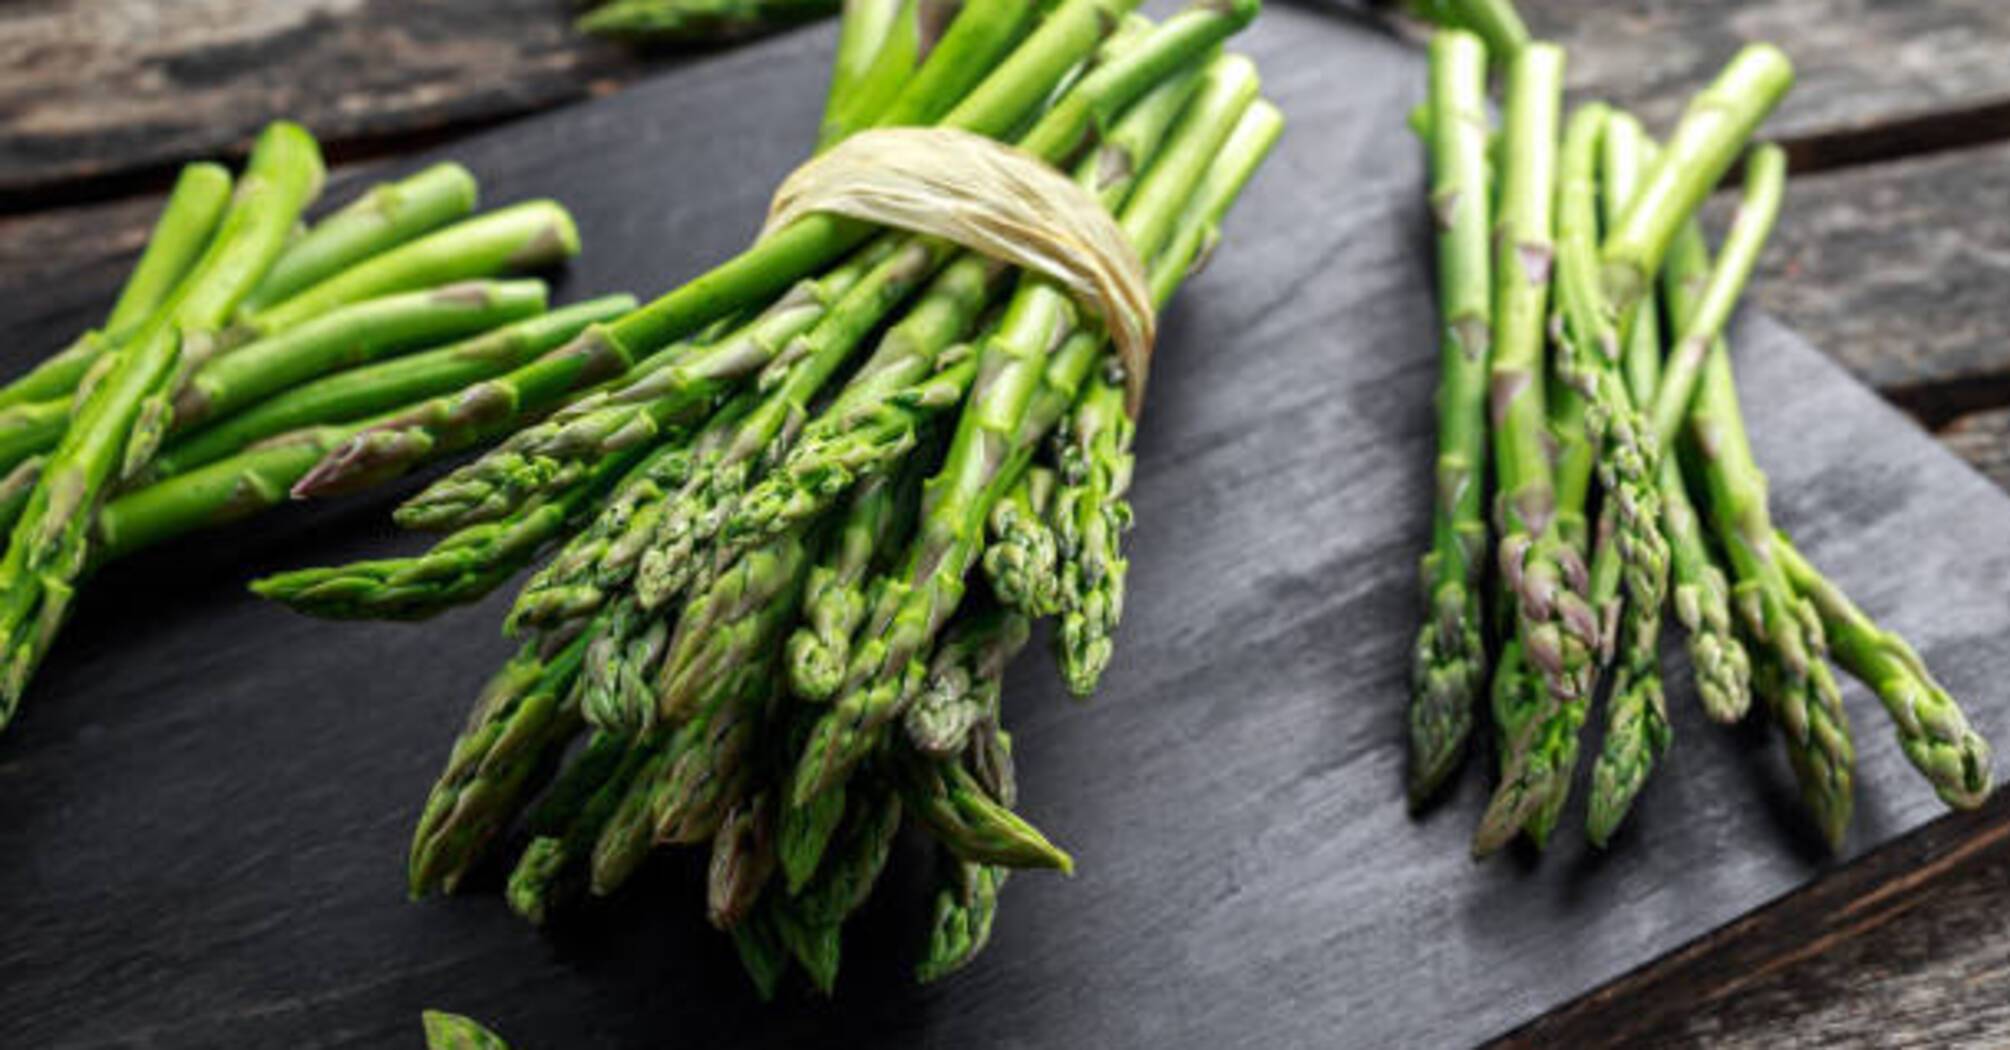 How to cook asparagus in a frying pan to make it healthy